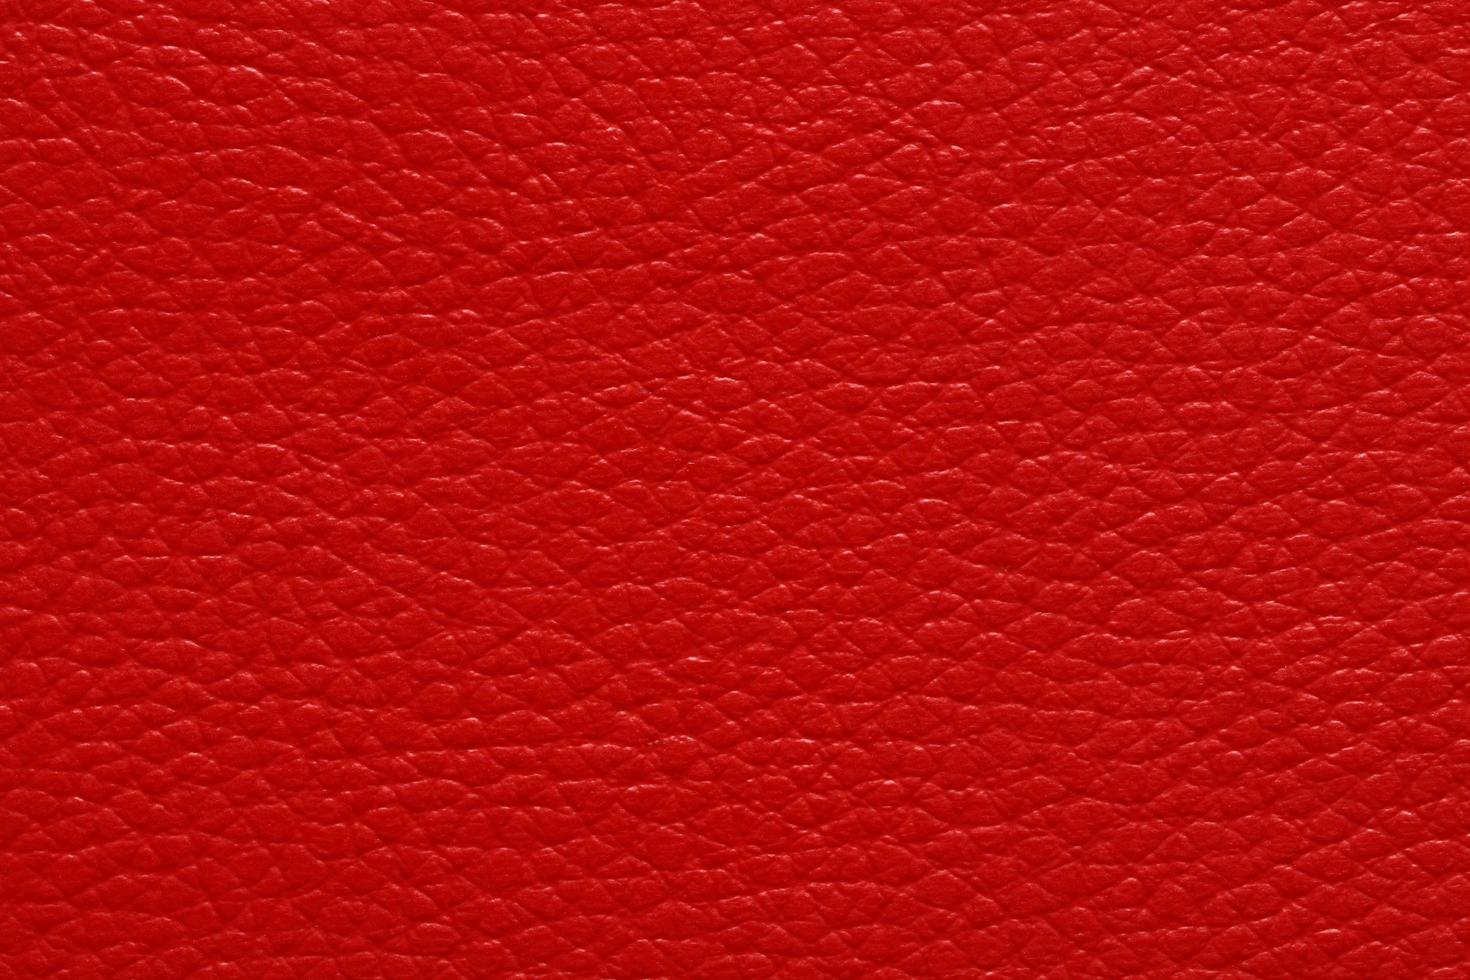 Glowing red leather sheet, abstract pattern texture background photo